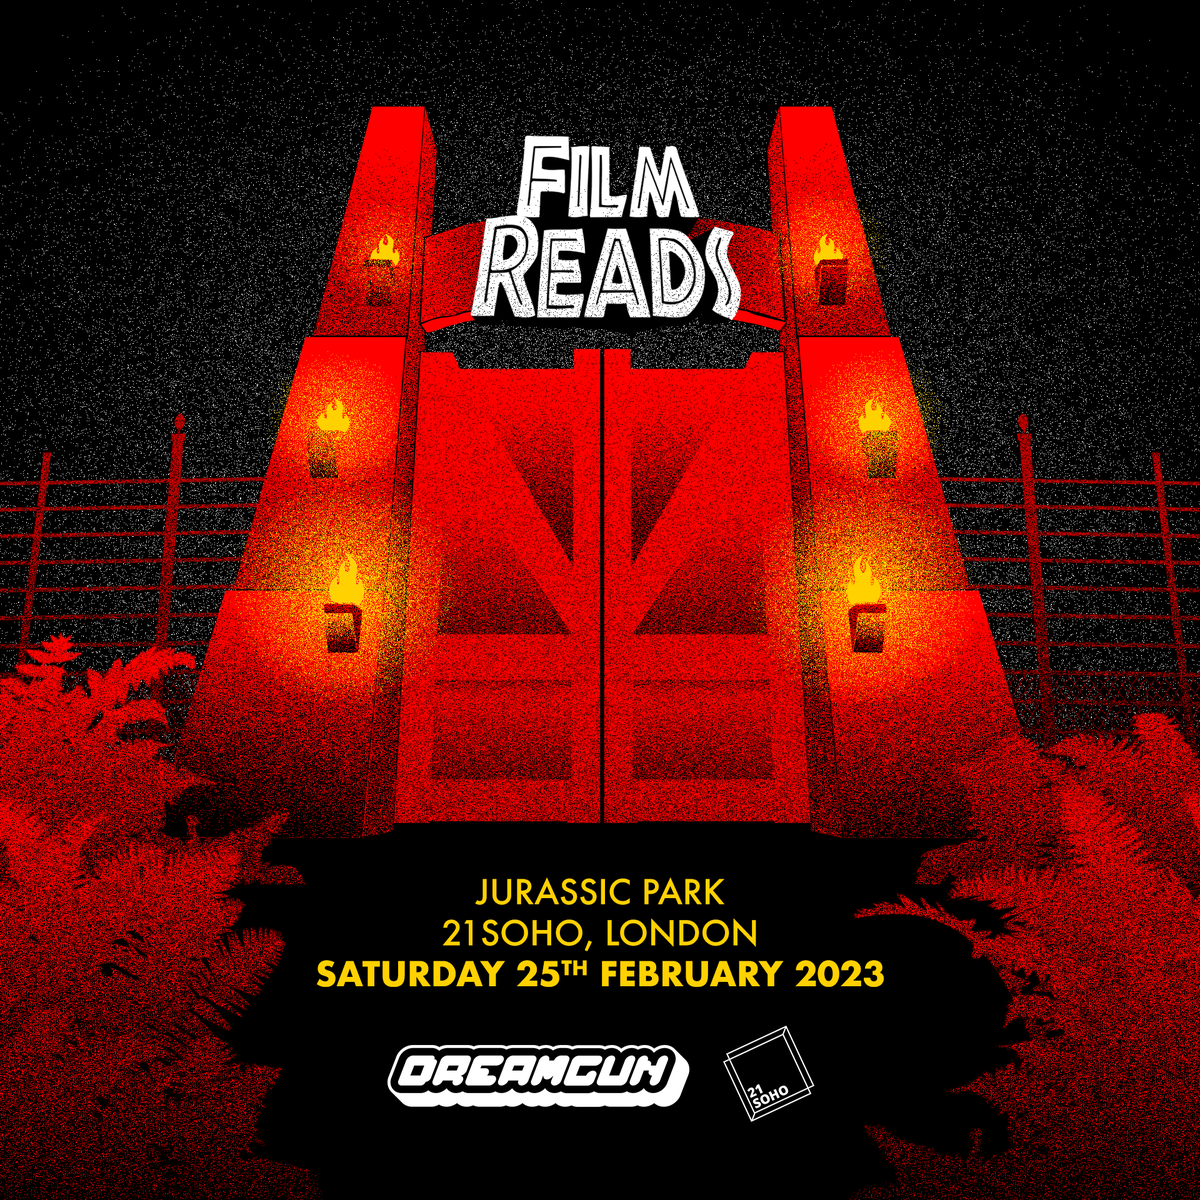 Announcing our new monthly Dreamgun night at 21Soho, London! A different Film Read every month starting with Jurassic Park this Saturday 25th February. Tickets are on sale now at tickettext.co.uk/s4dhuxwqeY